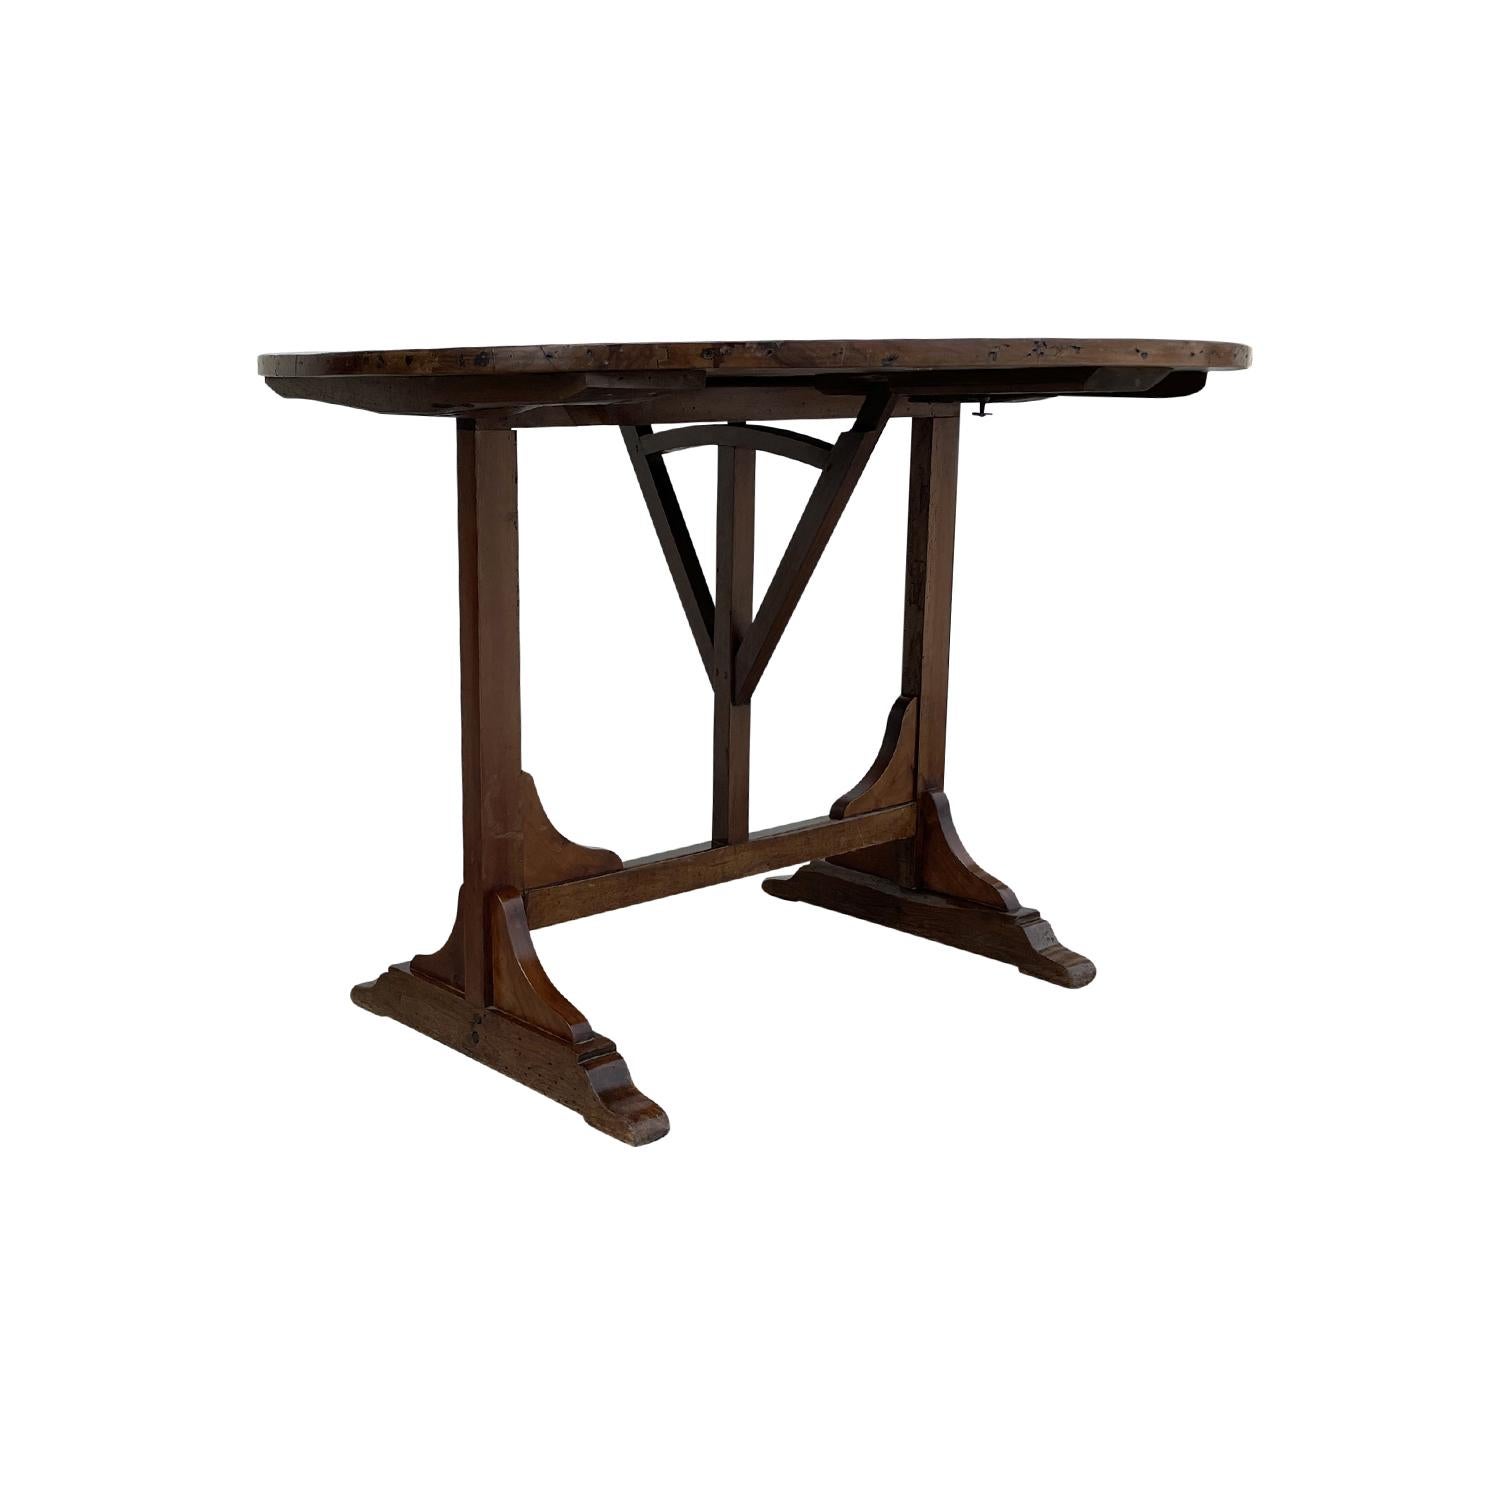 Hand-Crafted 19th Century French Provencal Walnut Folding Wine Table - Antique Center Table For Sale